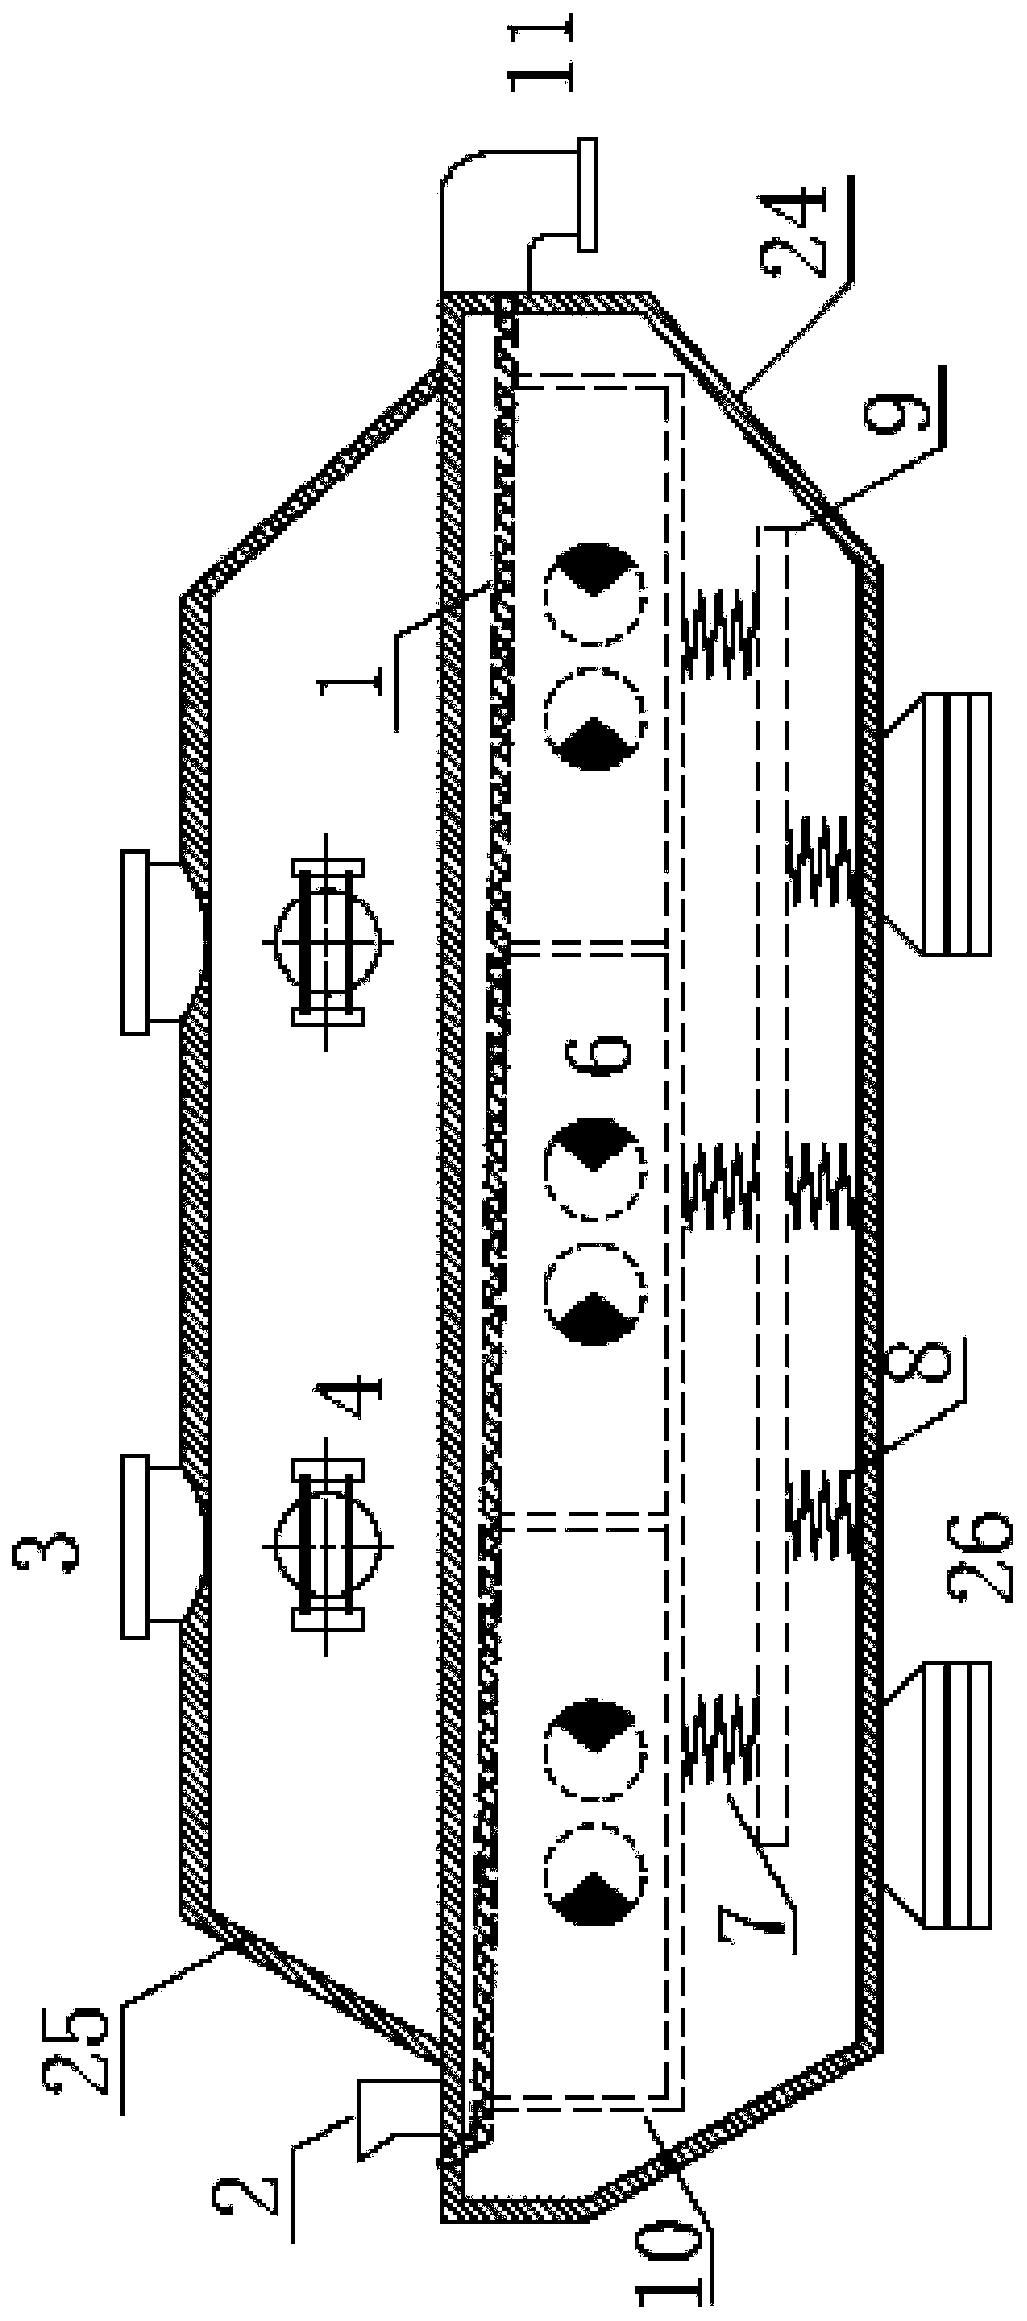 Multi-stage temperature difference frequency vibratory fluidization system and method for oxidizing and non-melting coal tar pitch pellets